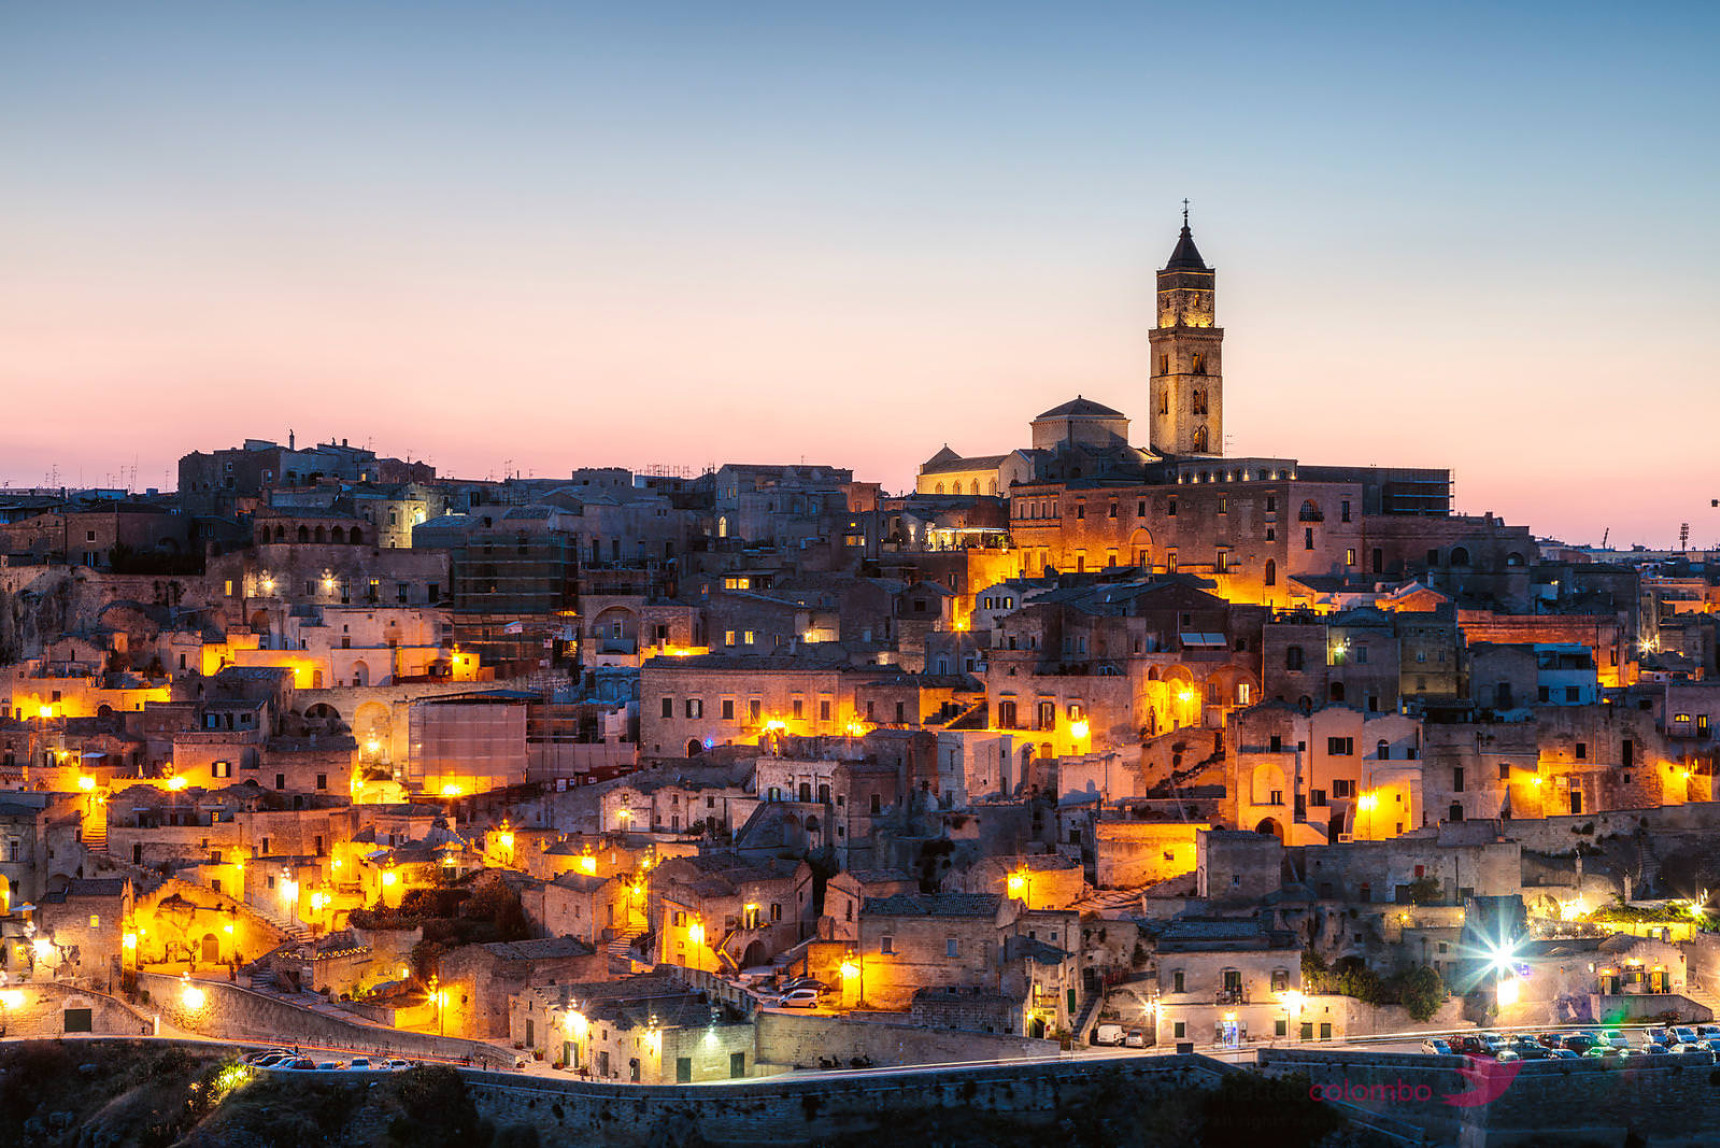 visit-matera-with-this-exclusive-sybarite-experience,-in-partnership-with-il-palazzotto-residences-and-winery